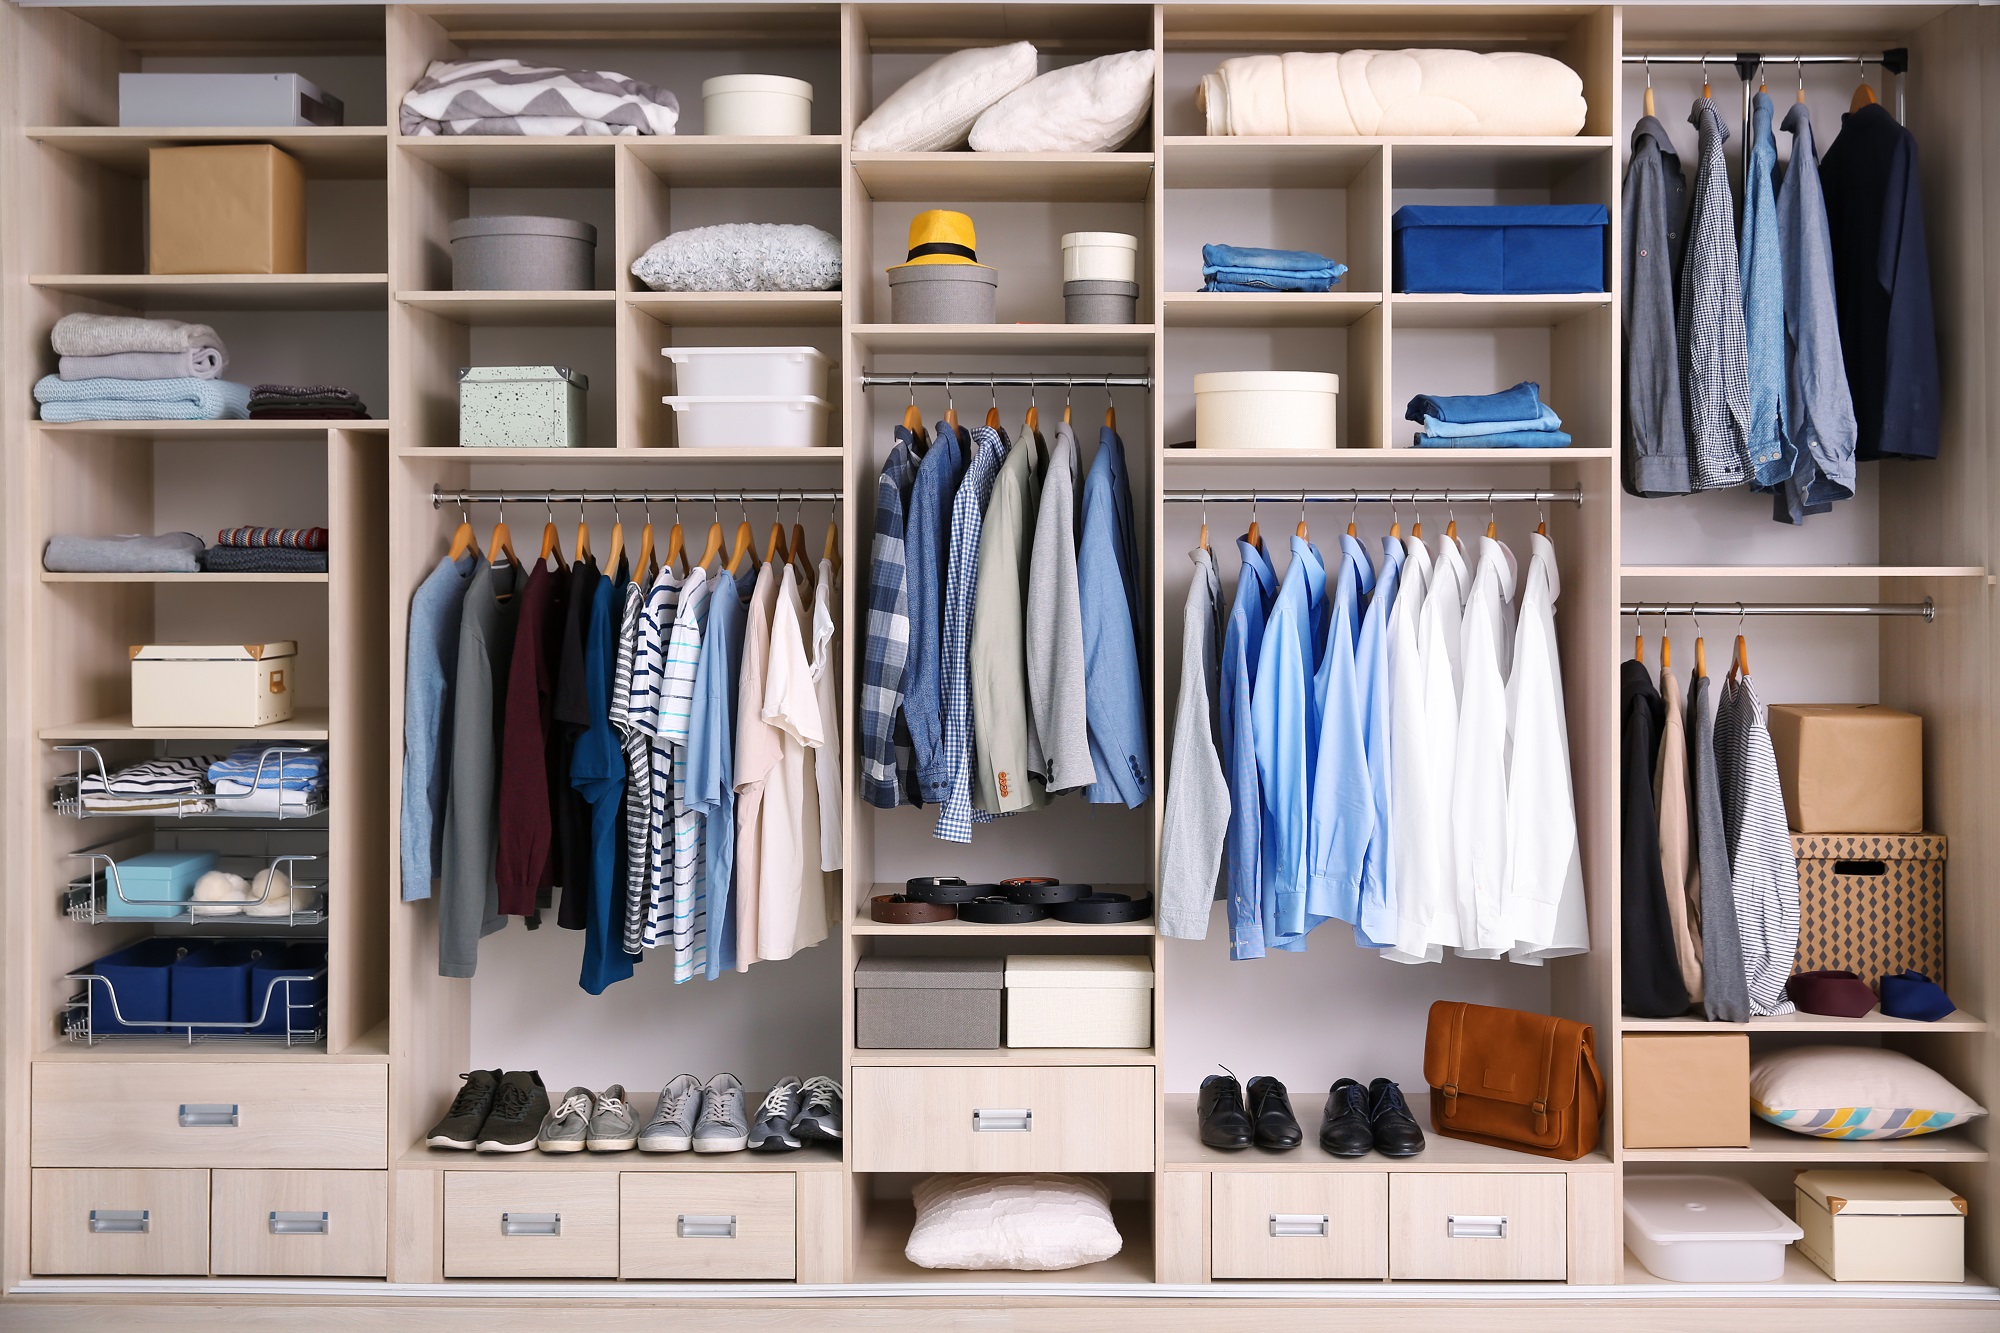 Big Wardrobe With Male Clothes For Dressing Room